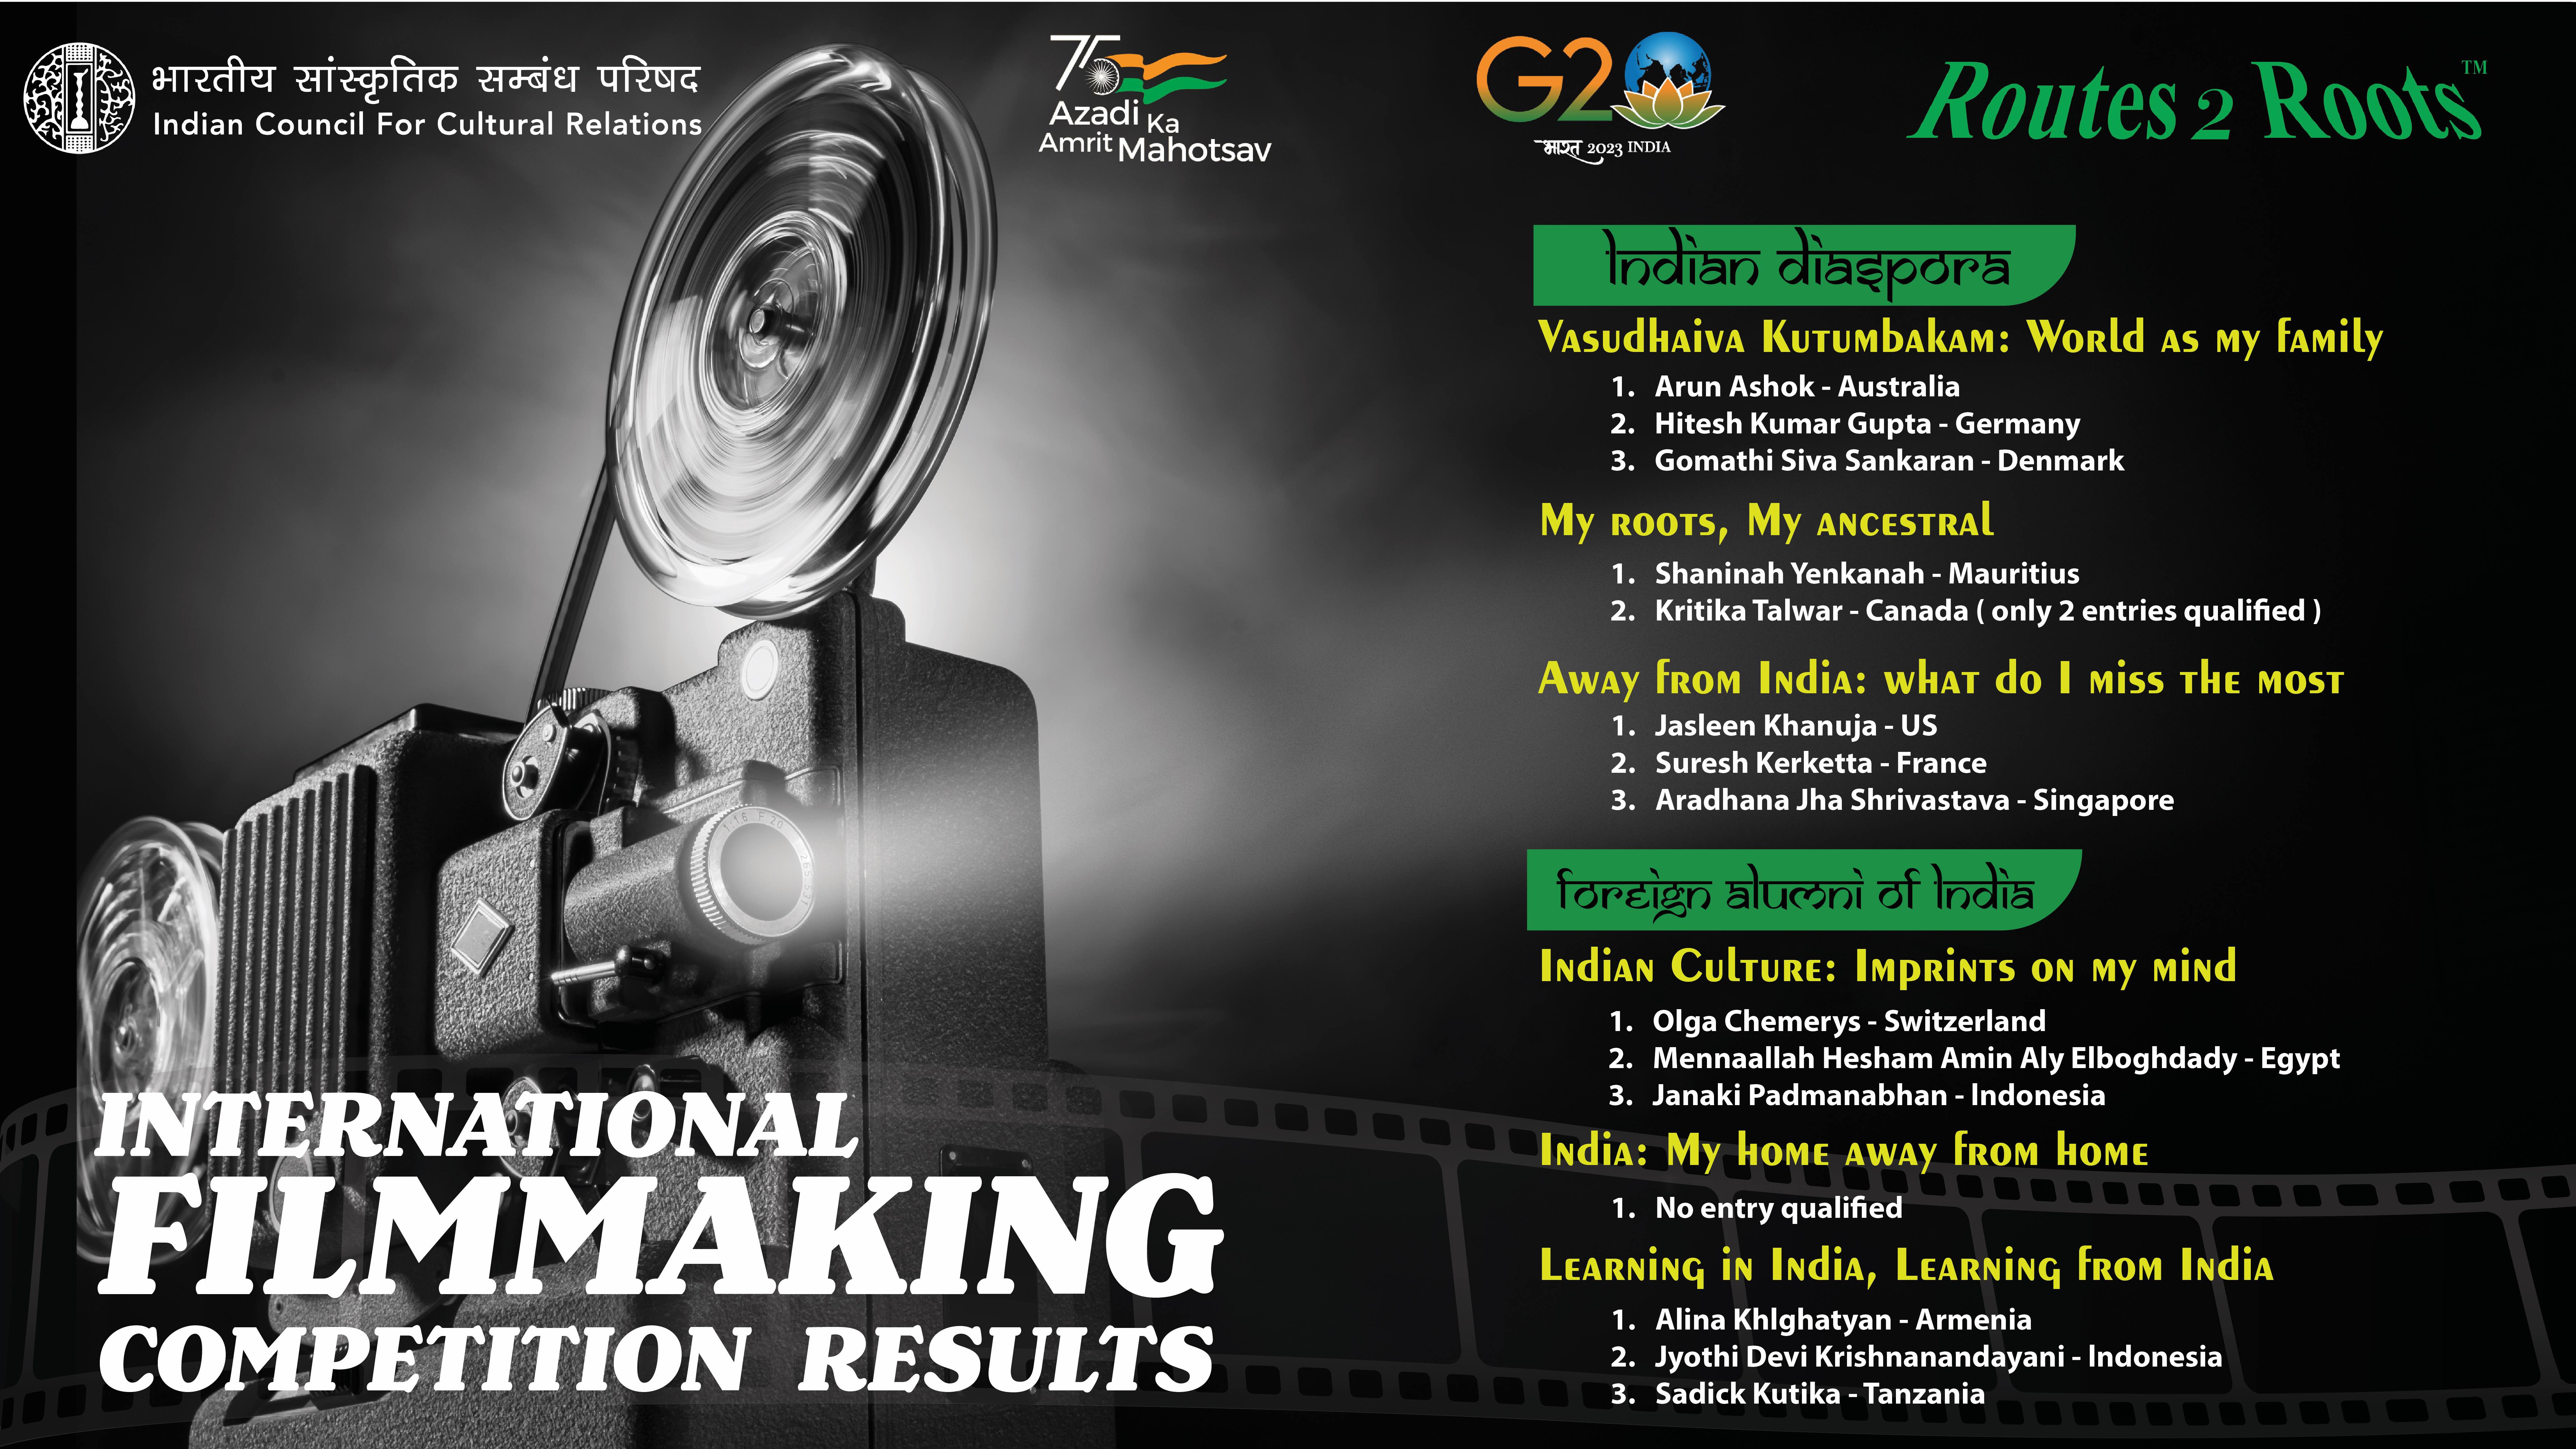 International Film making Competition for Indian Diaspora and Foreign Alumni in collaboration with Routes2roots held from 09 May,2022 to 1st January, 2023 under different theme for different age group.Hon'ble President,ICCR will grace the award function